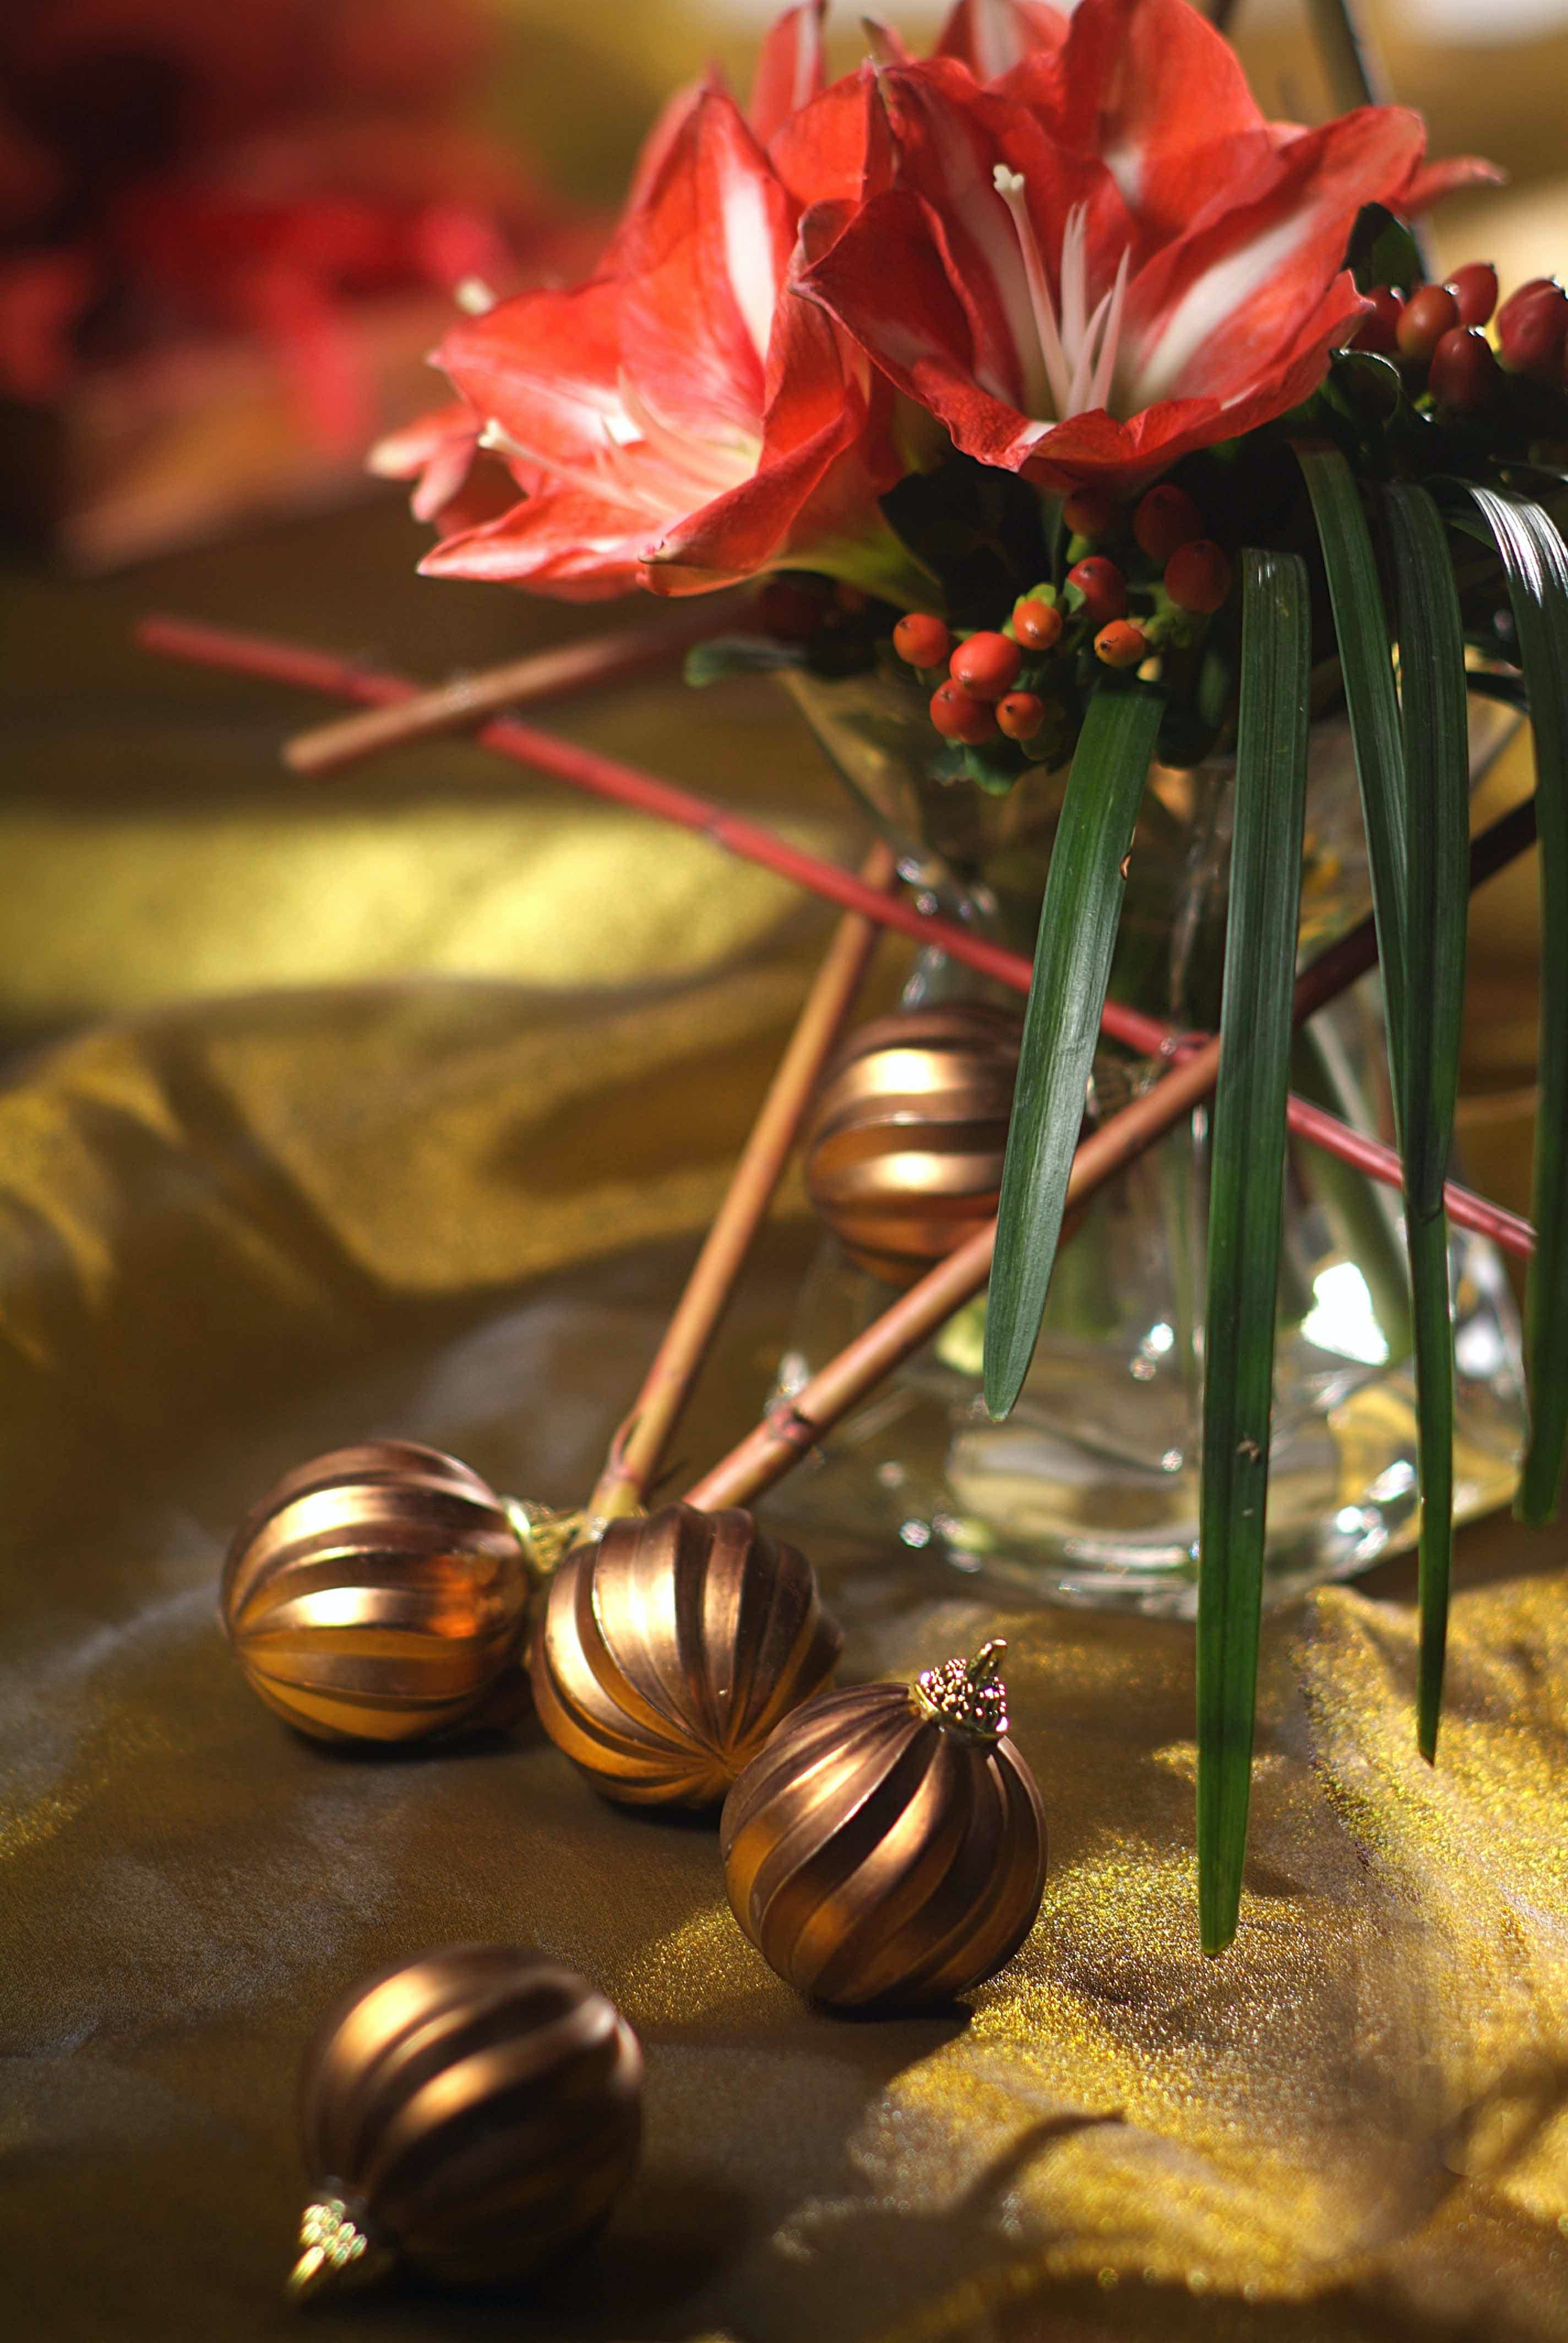 Christmas balls lie in front of a bouquet in a vase